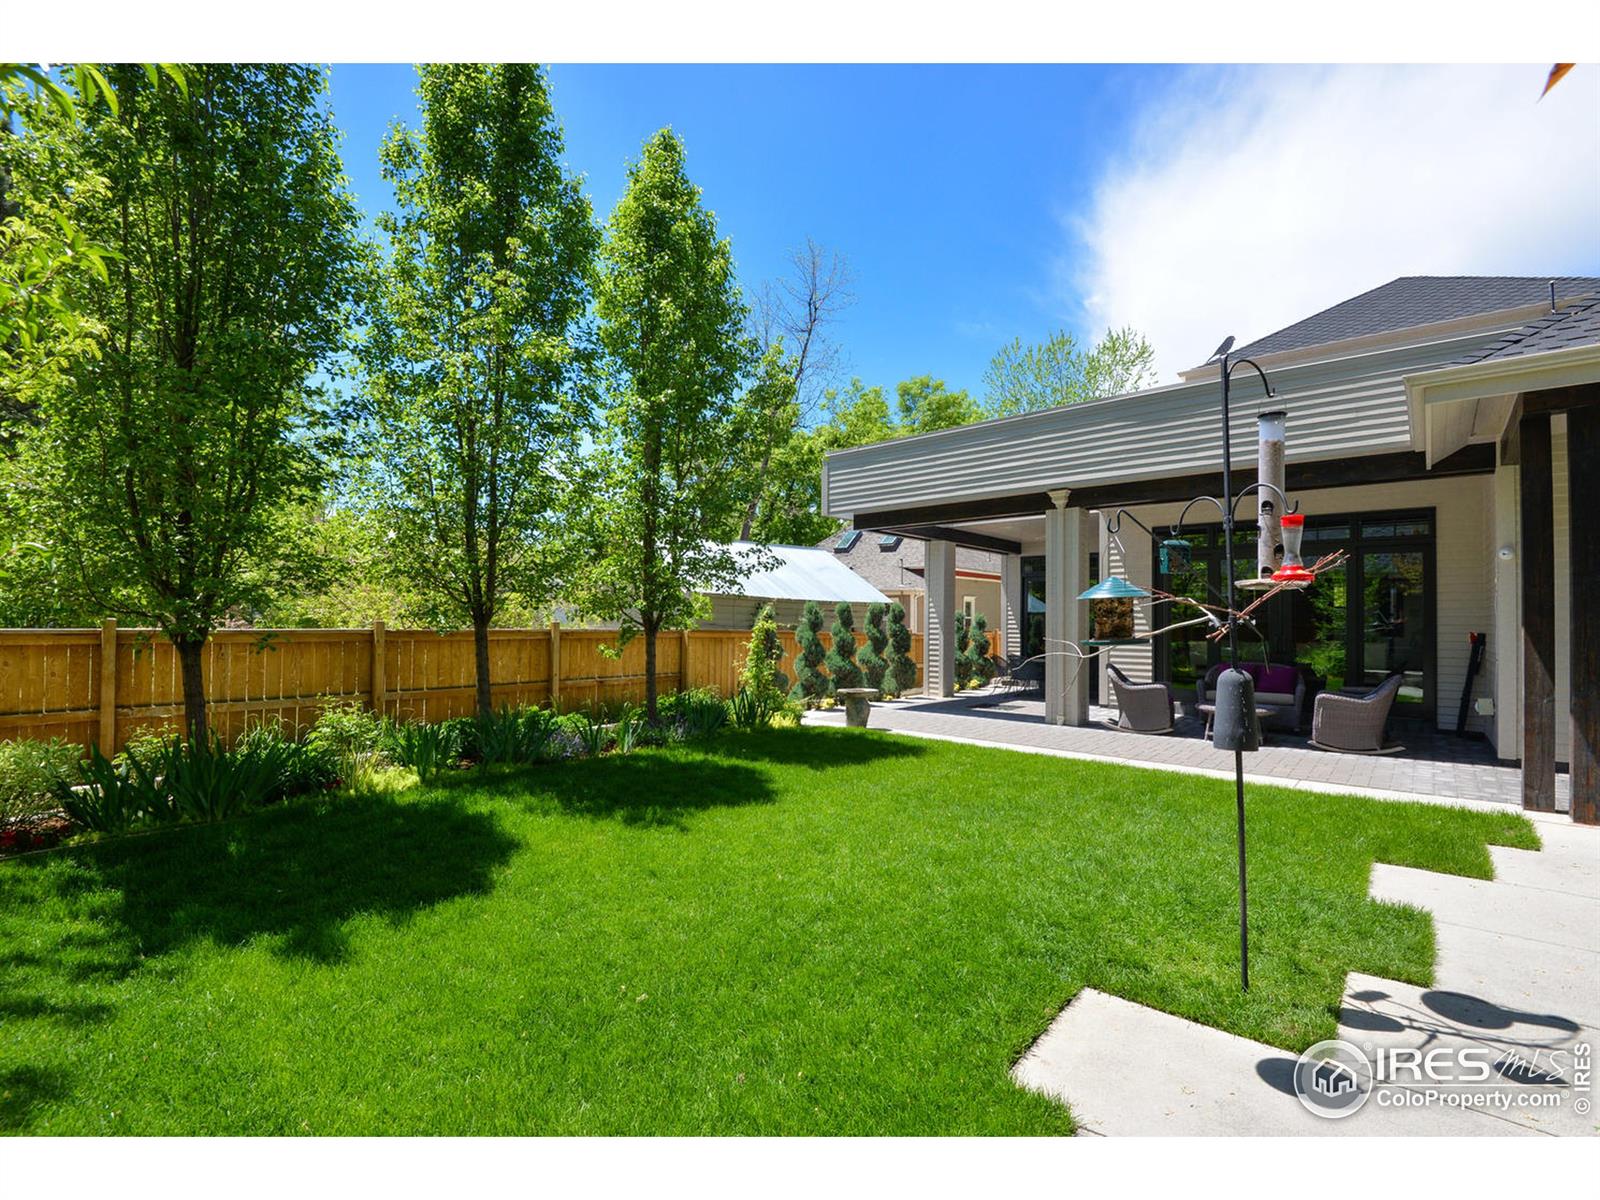 122 Whitcomb, Fort Collins, CO